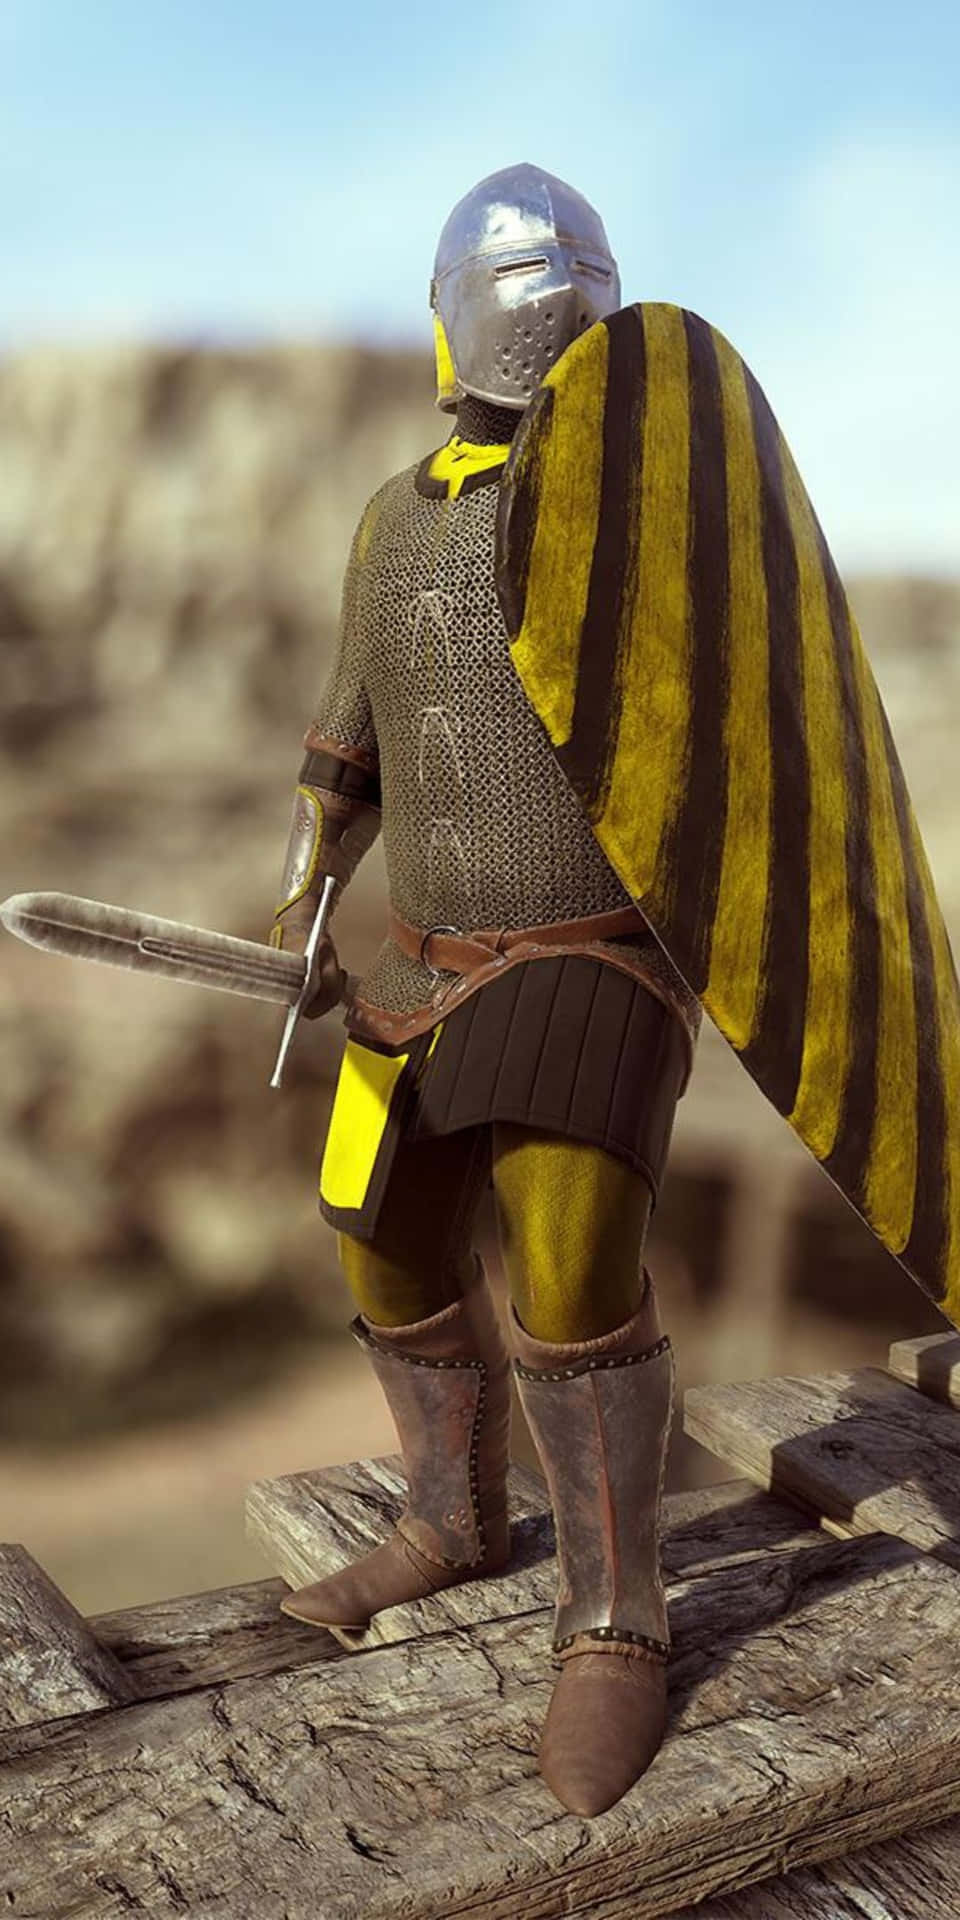 A Knight In Armor Is Standing On A Wooden Platform